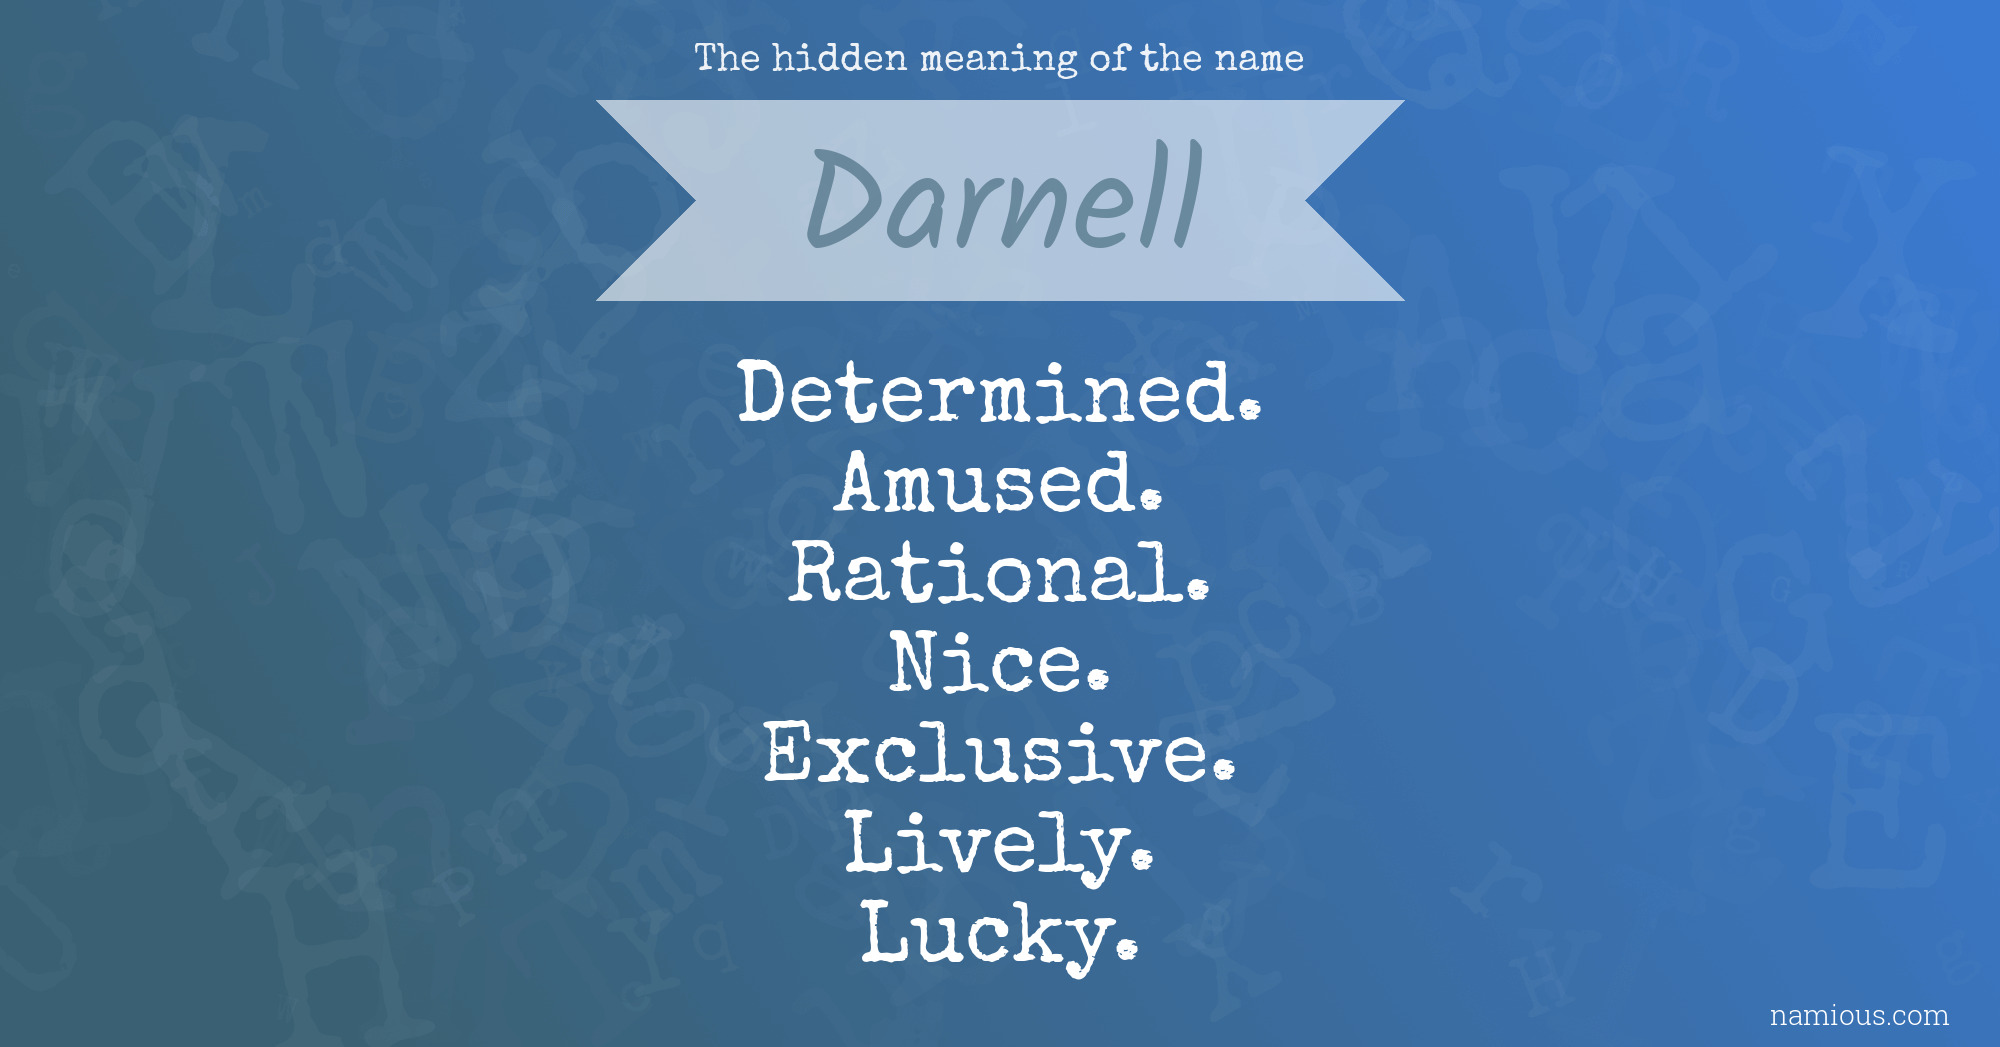 The hidden meaning of the name Darnell